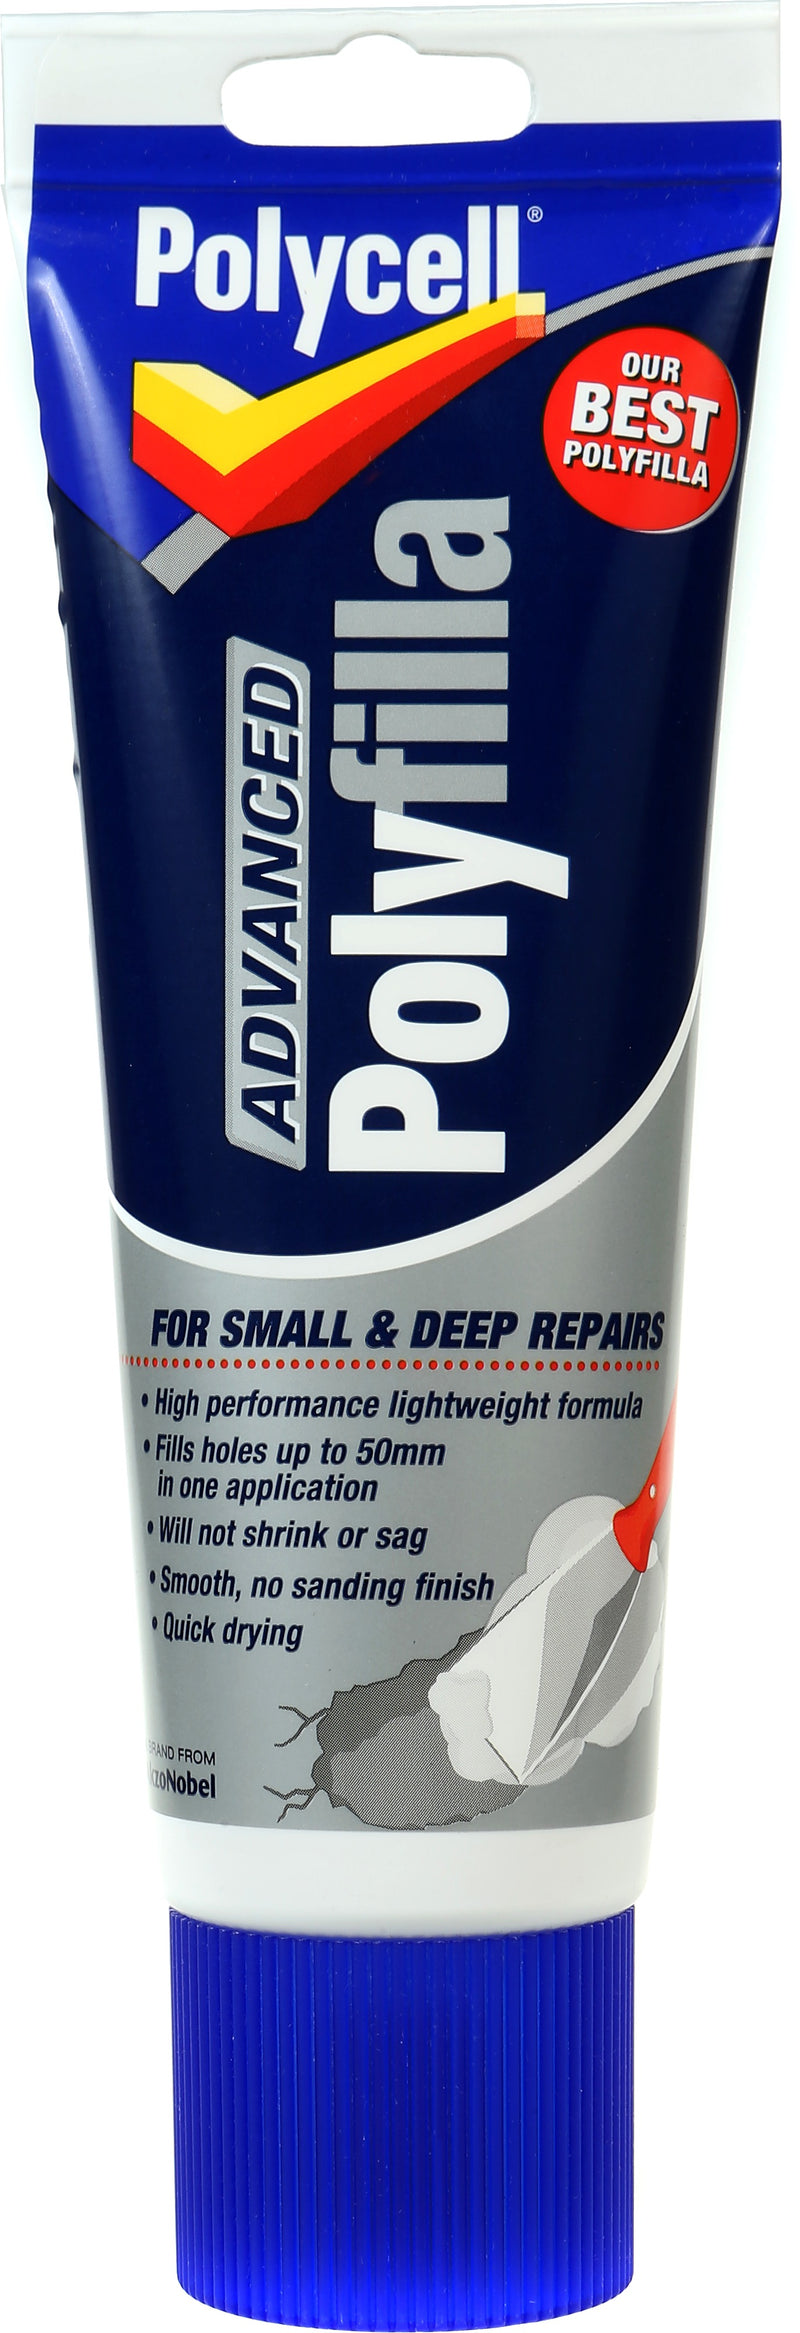 Polycell Advanced All in One 200ml